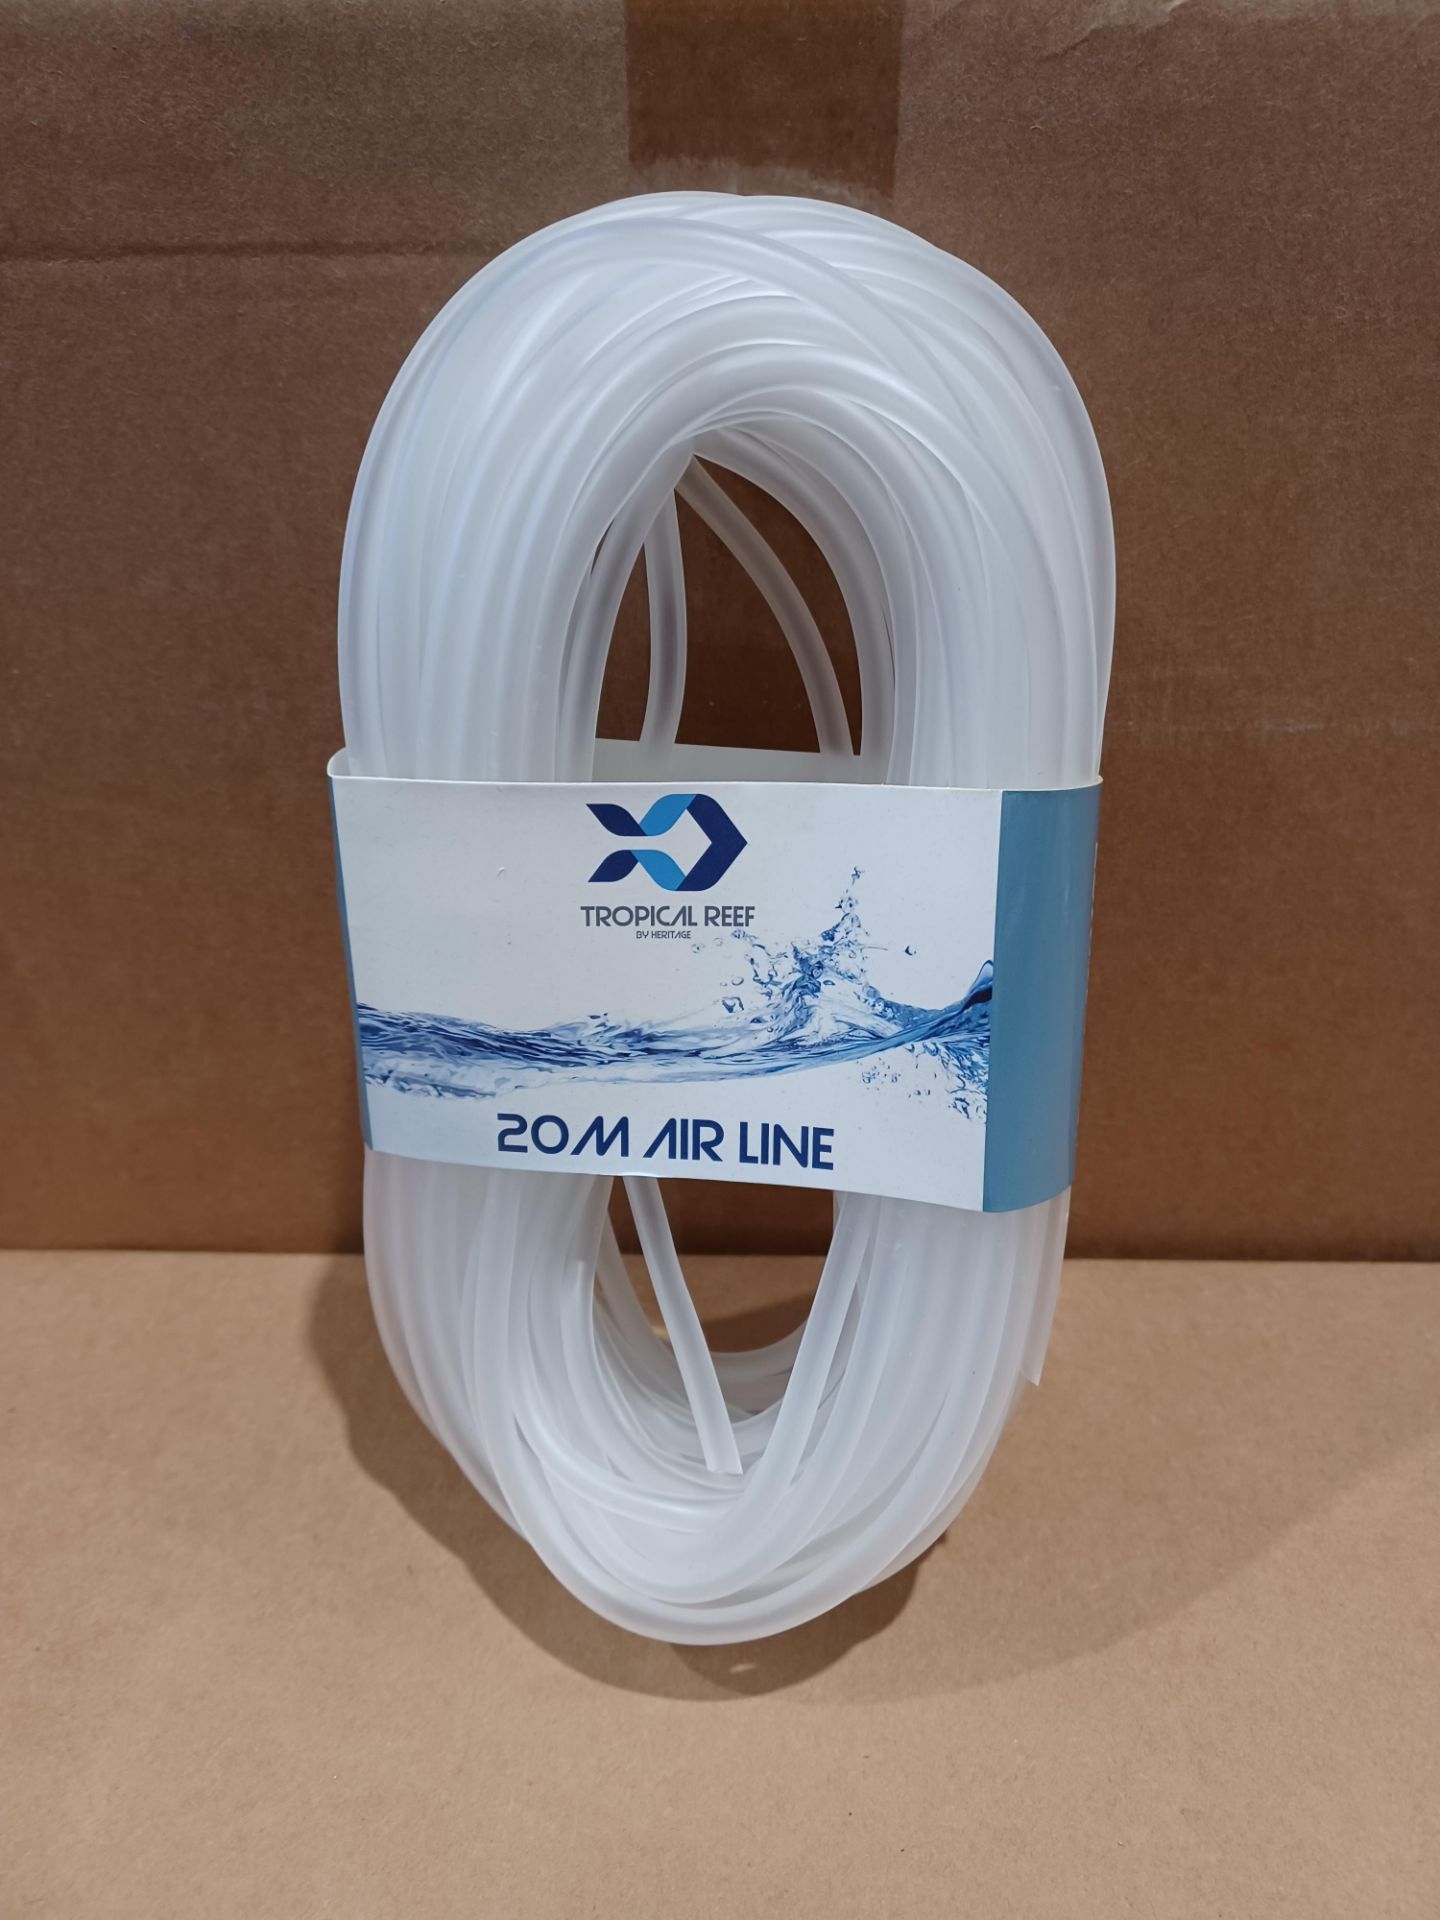 23 X BRAND NEW TROPICAL REEF 20M AIR LINES S1-33